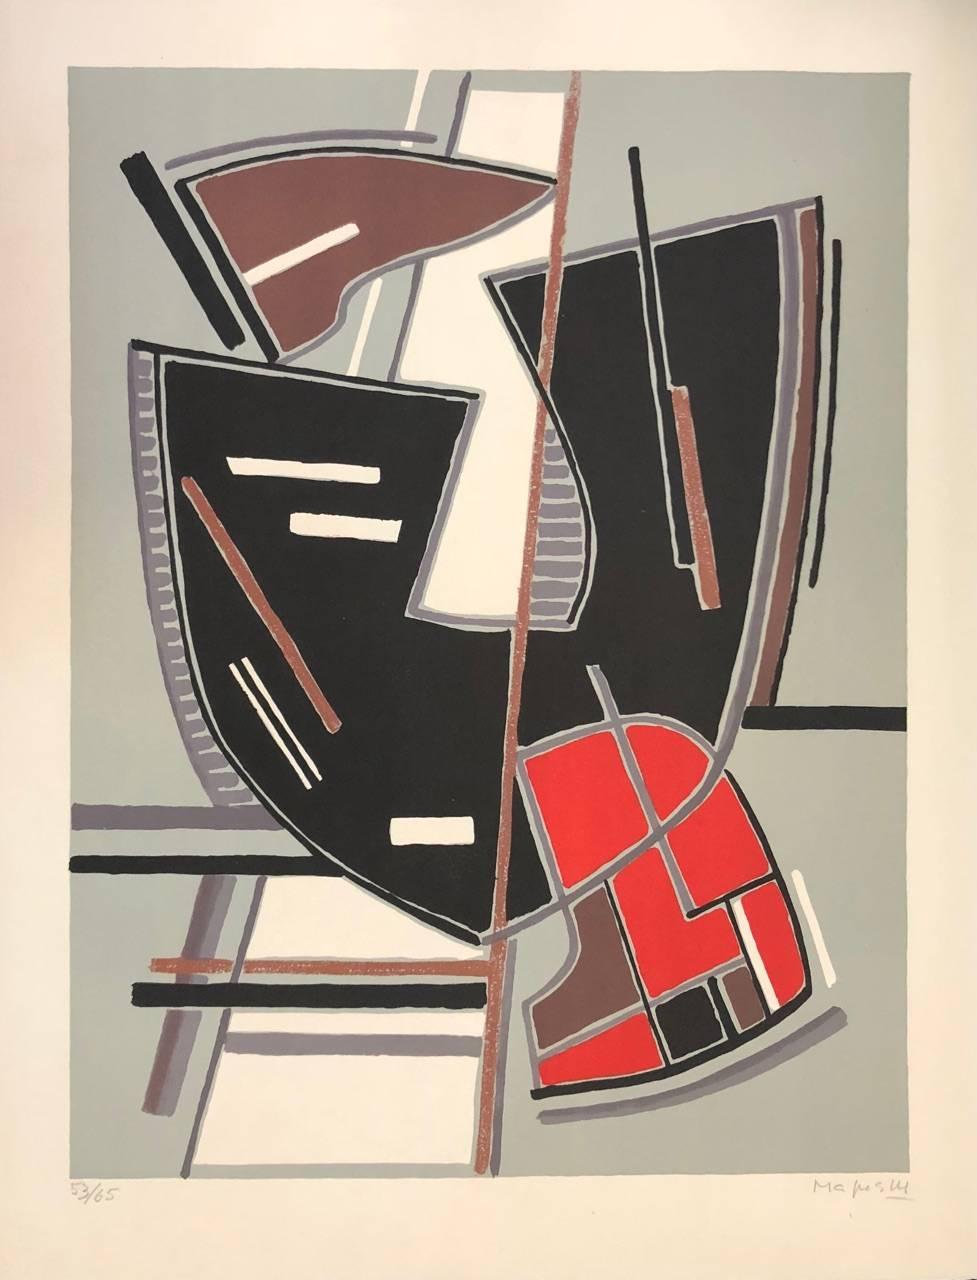 Alberto Magnelli Abstract Print - Abstract Composition with Red - Original Litho by A. Magnelli - 1965